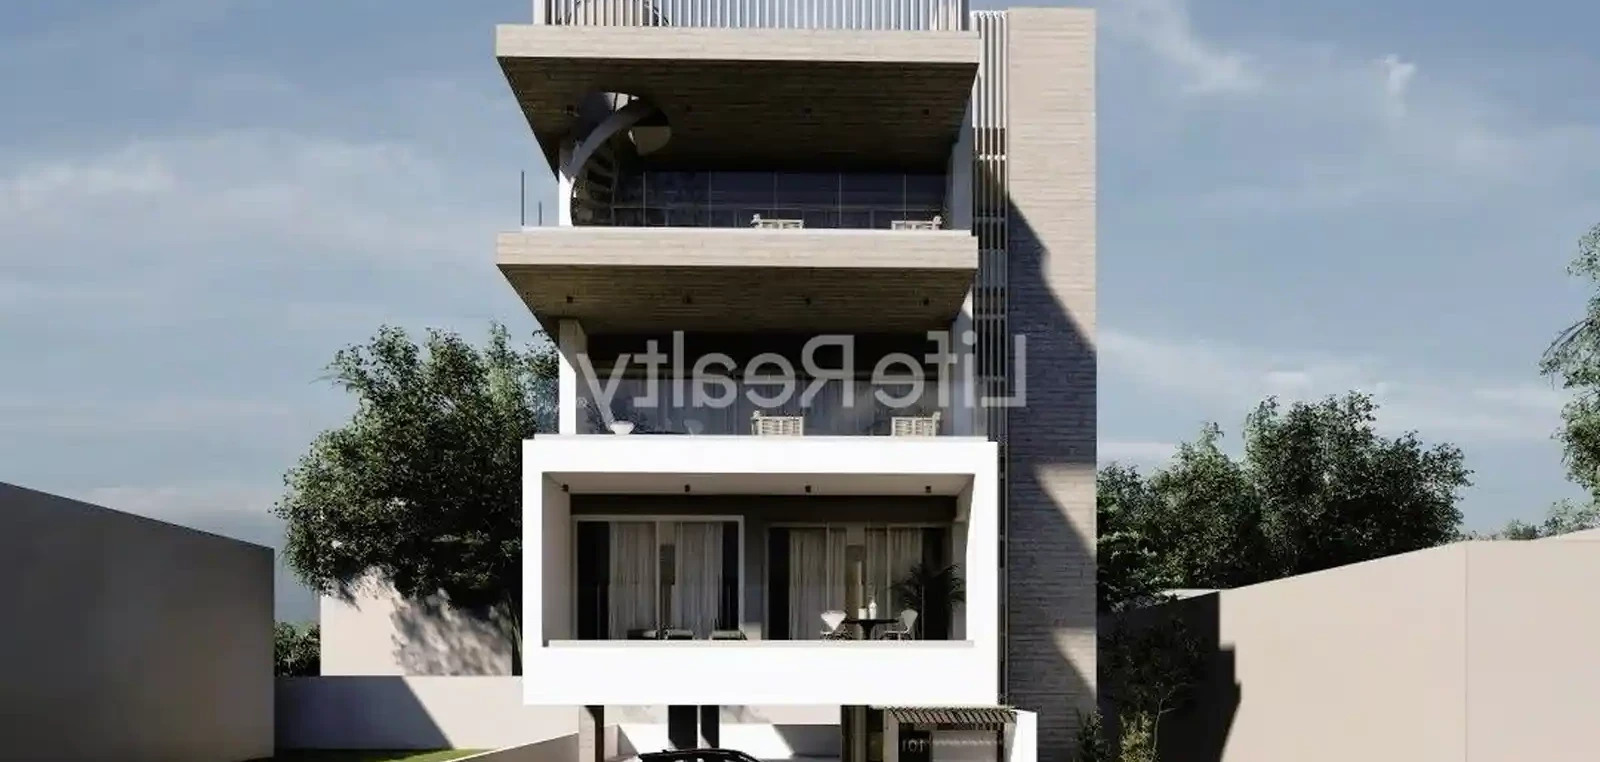 2-bedroom apartment fоr sаle €418.900, image 1